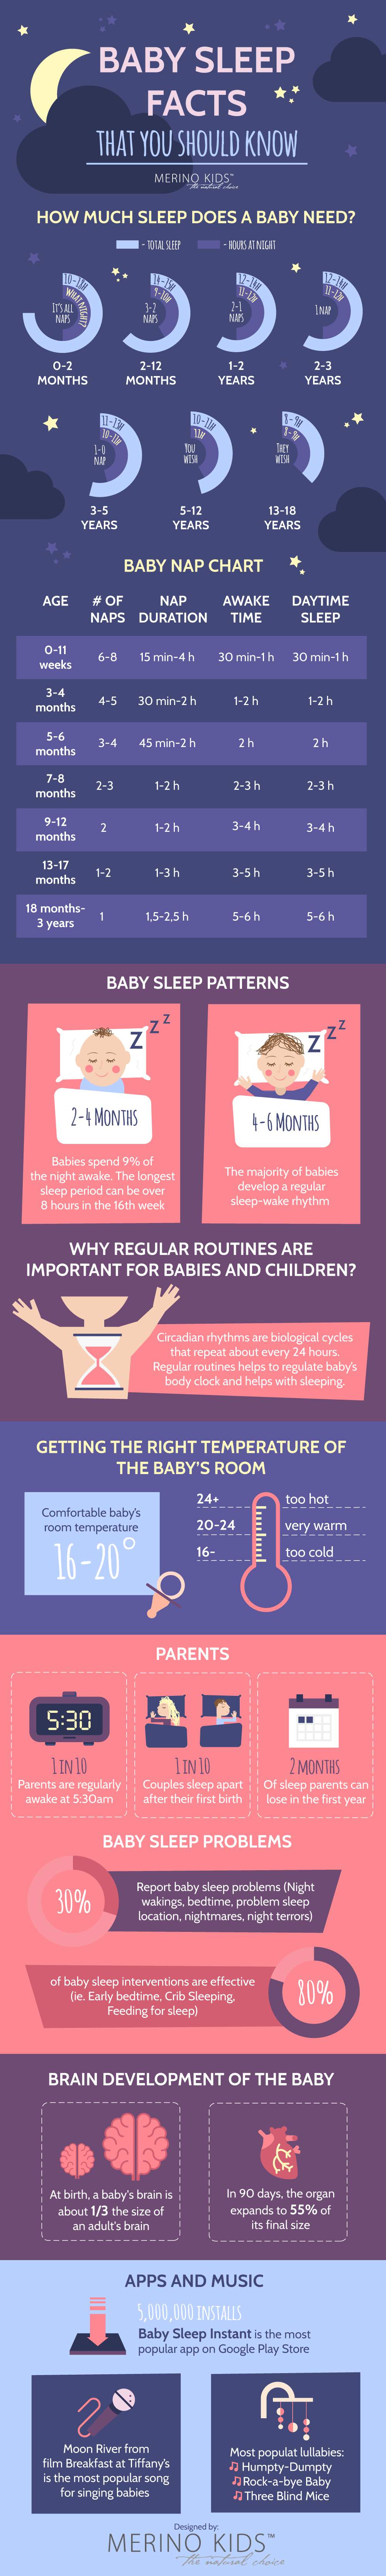 How Much Sleep Does a Baby Need